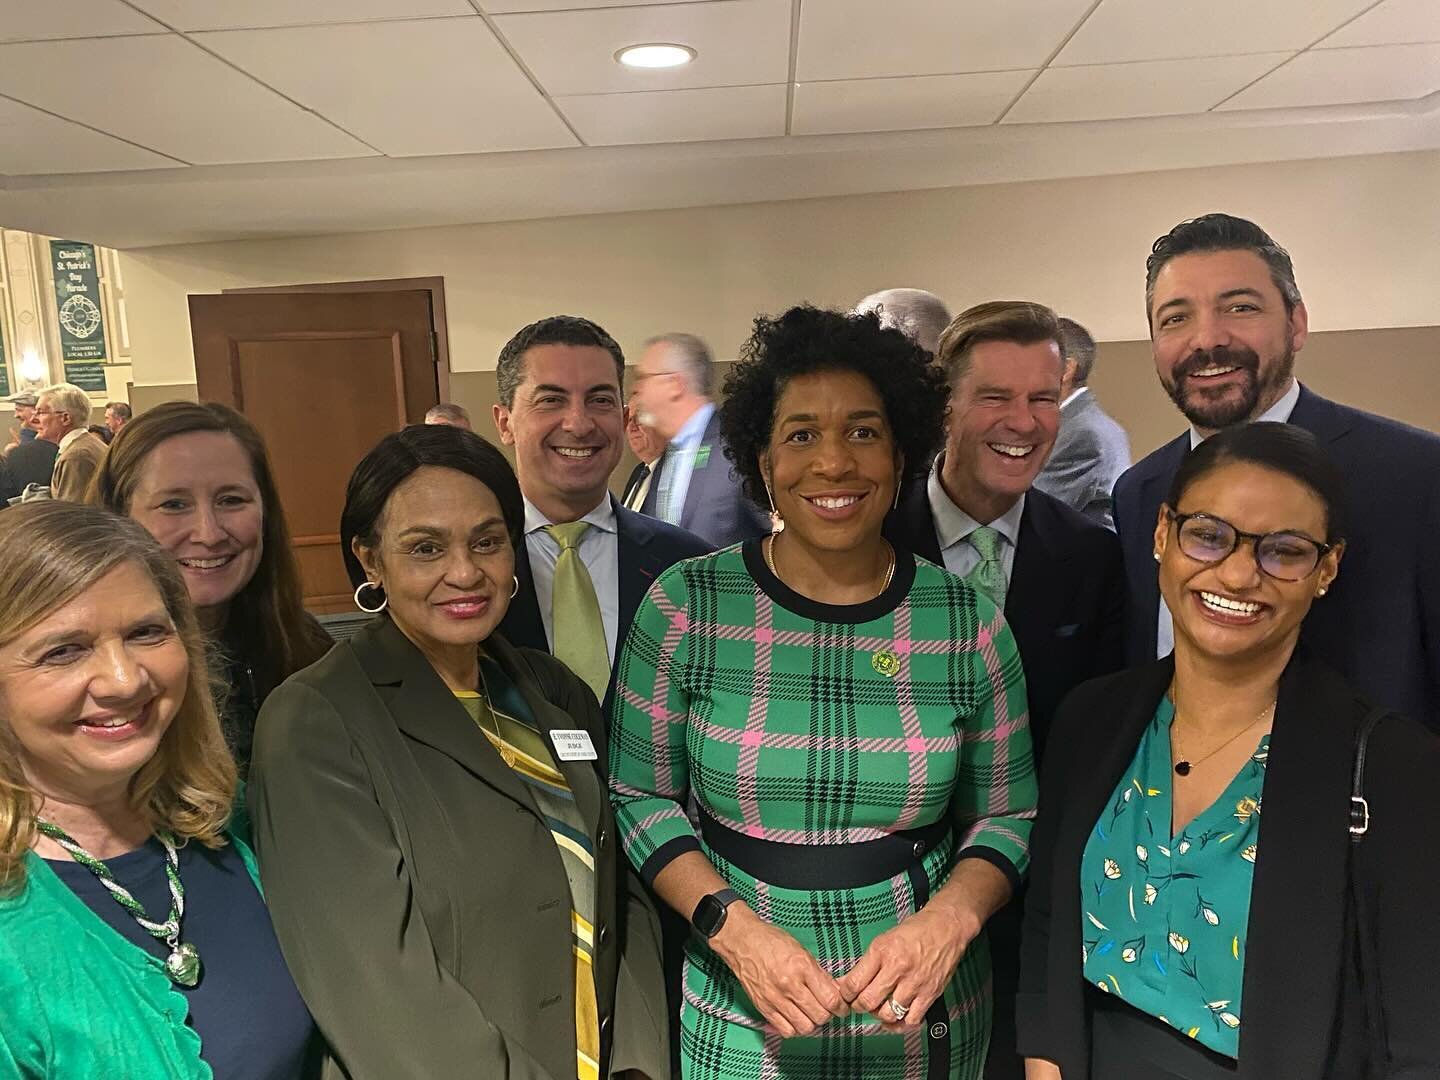 Thanks to local 399 plumbers and Presiding Judge Honorable Diann Marsalek for inviting me to the pre St Patrick&rsquo;s day parade dinner. This dinner was star studded including Lieutenant Governor Juliana Stratton and Alderwoman Jeylu Gutierrez.